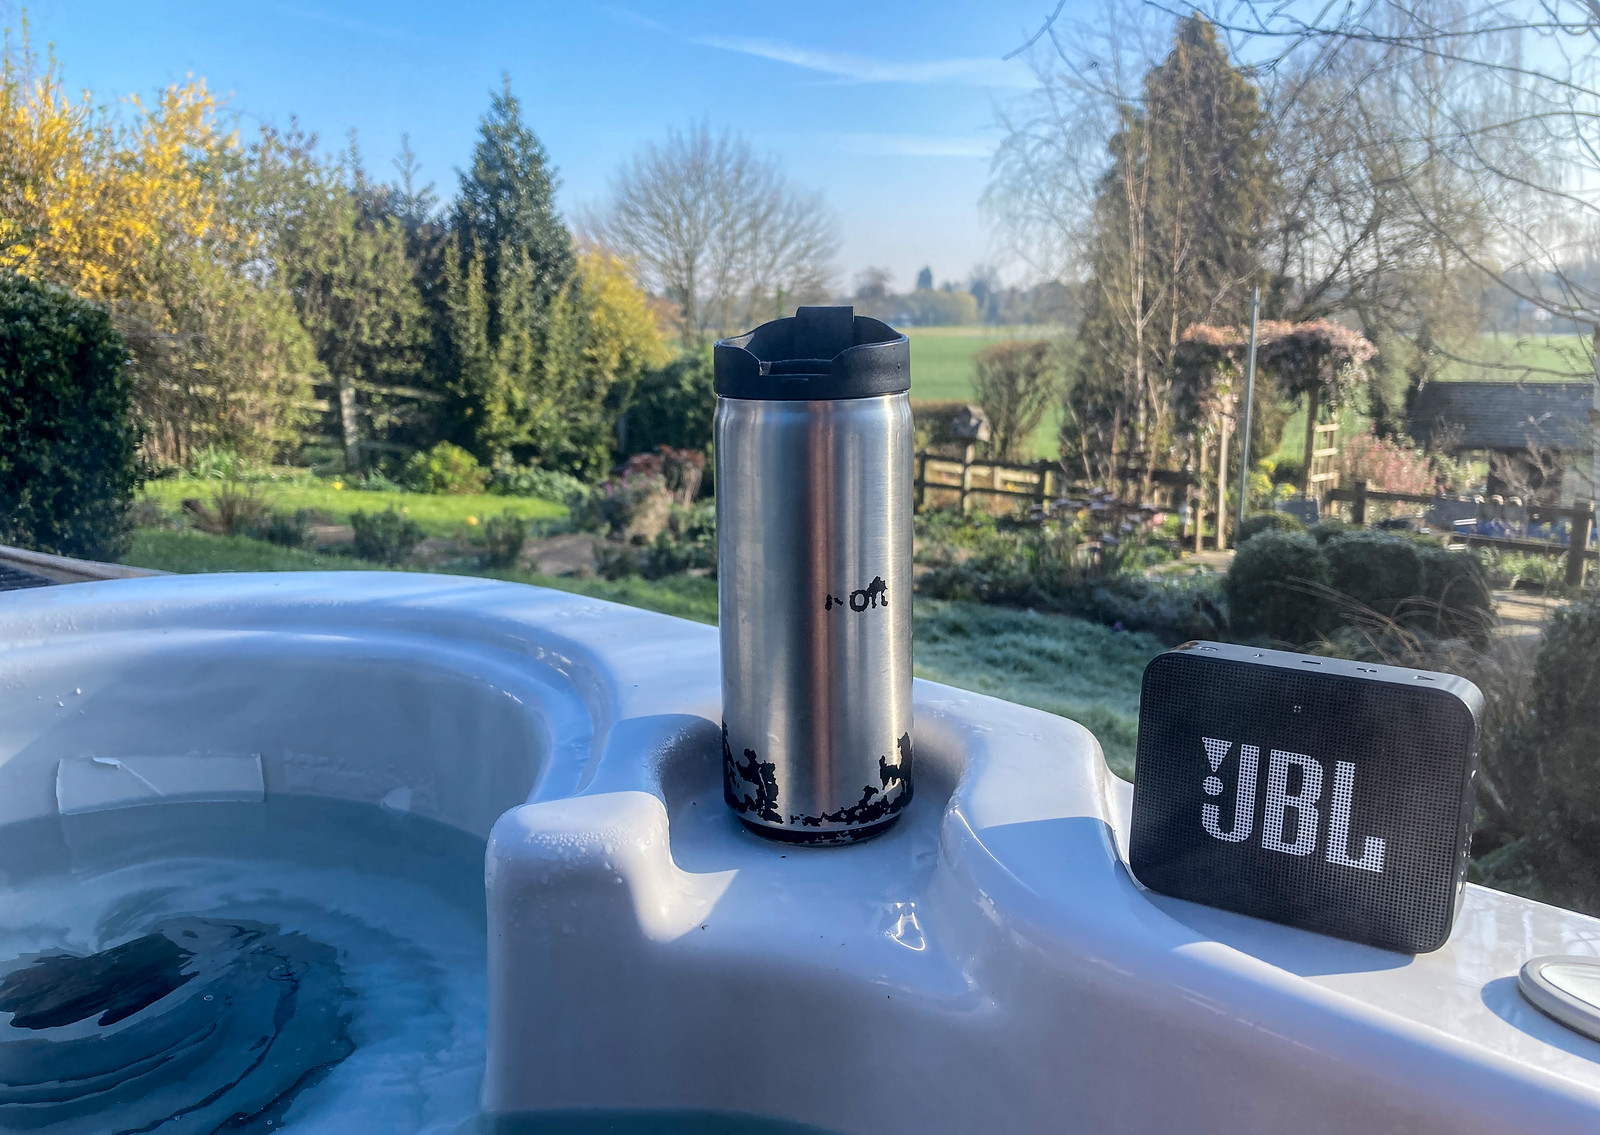 Coffee, podcast, soak and a view